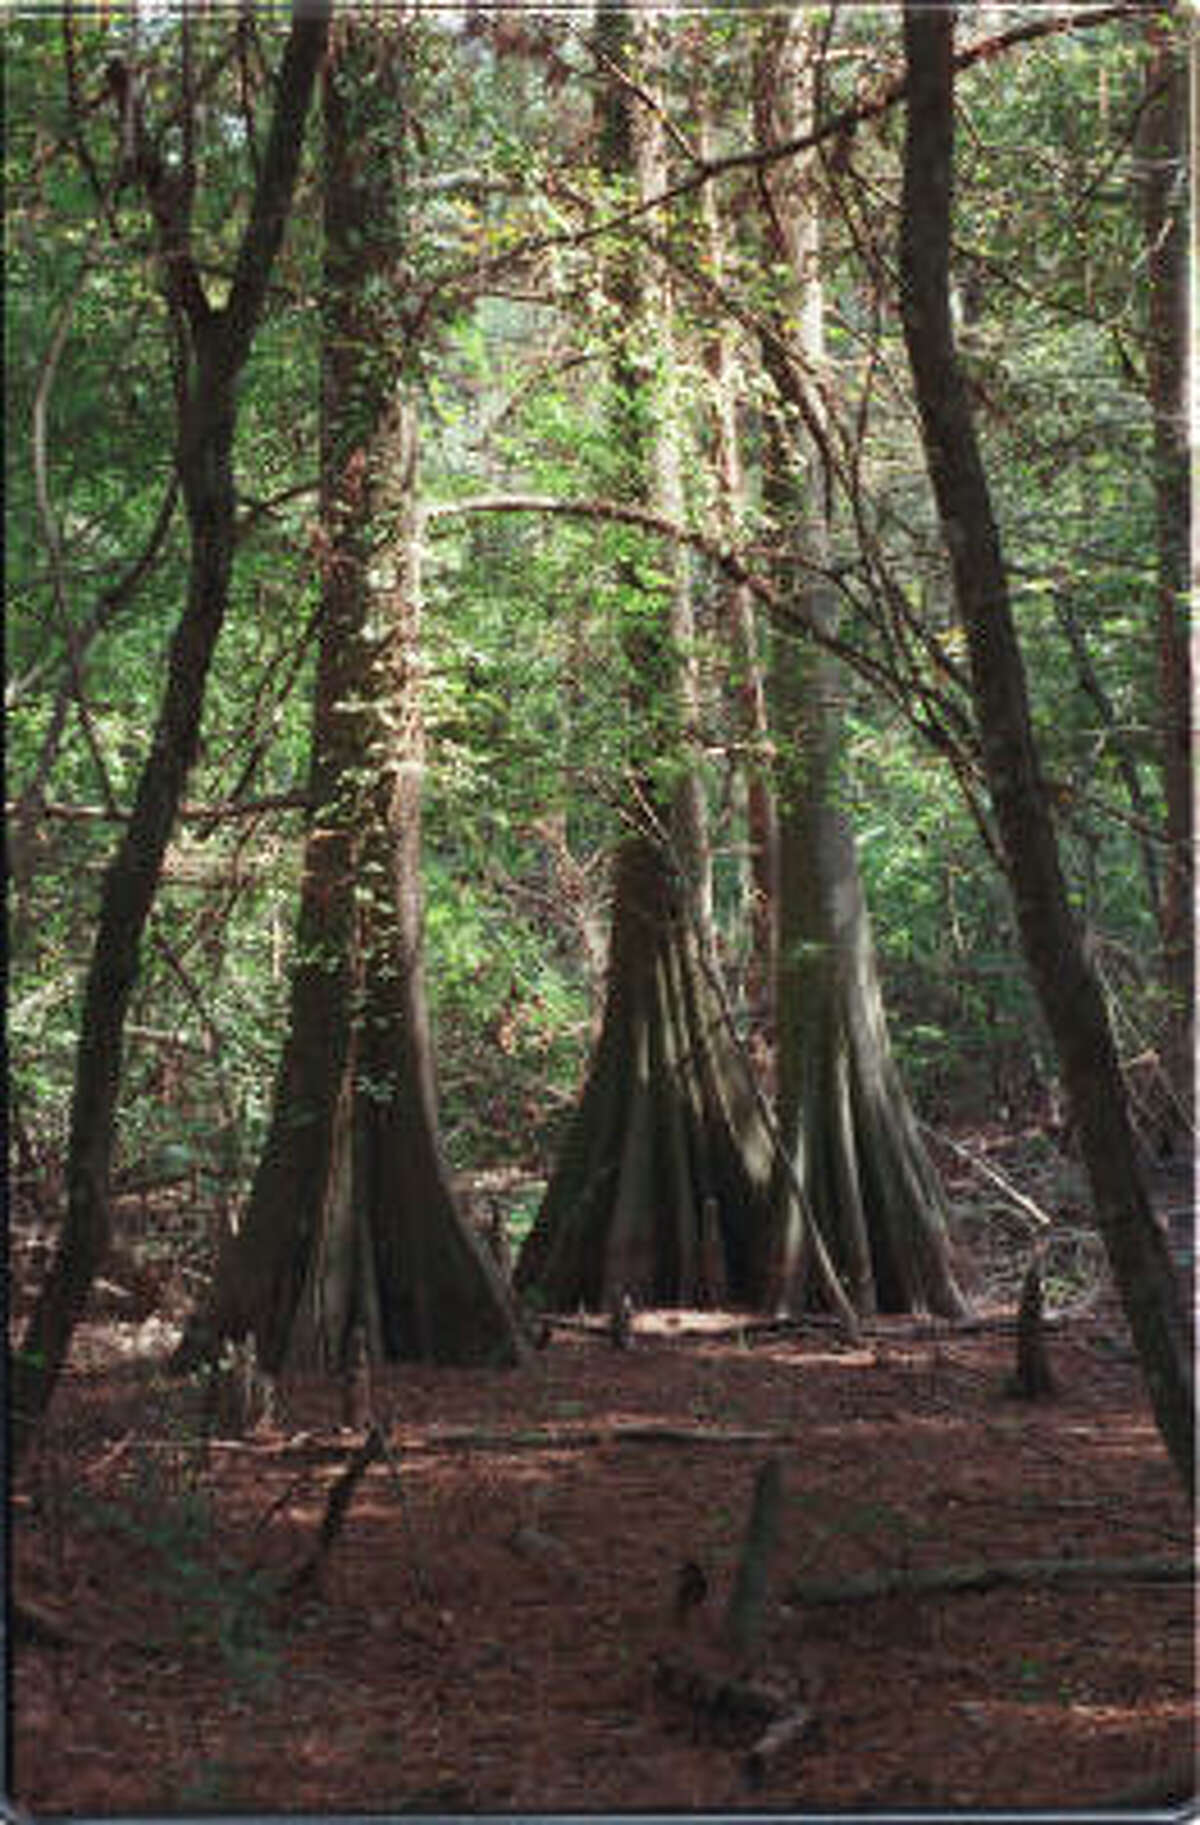 Bald cypress trees stretch toward the sky along the Post Oak Trail at the Mercer Arboretum & Botanic Gardens in Humble.